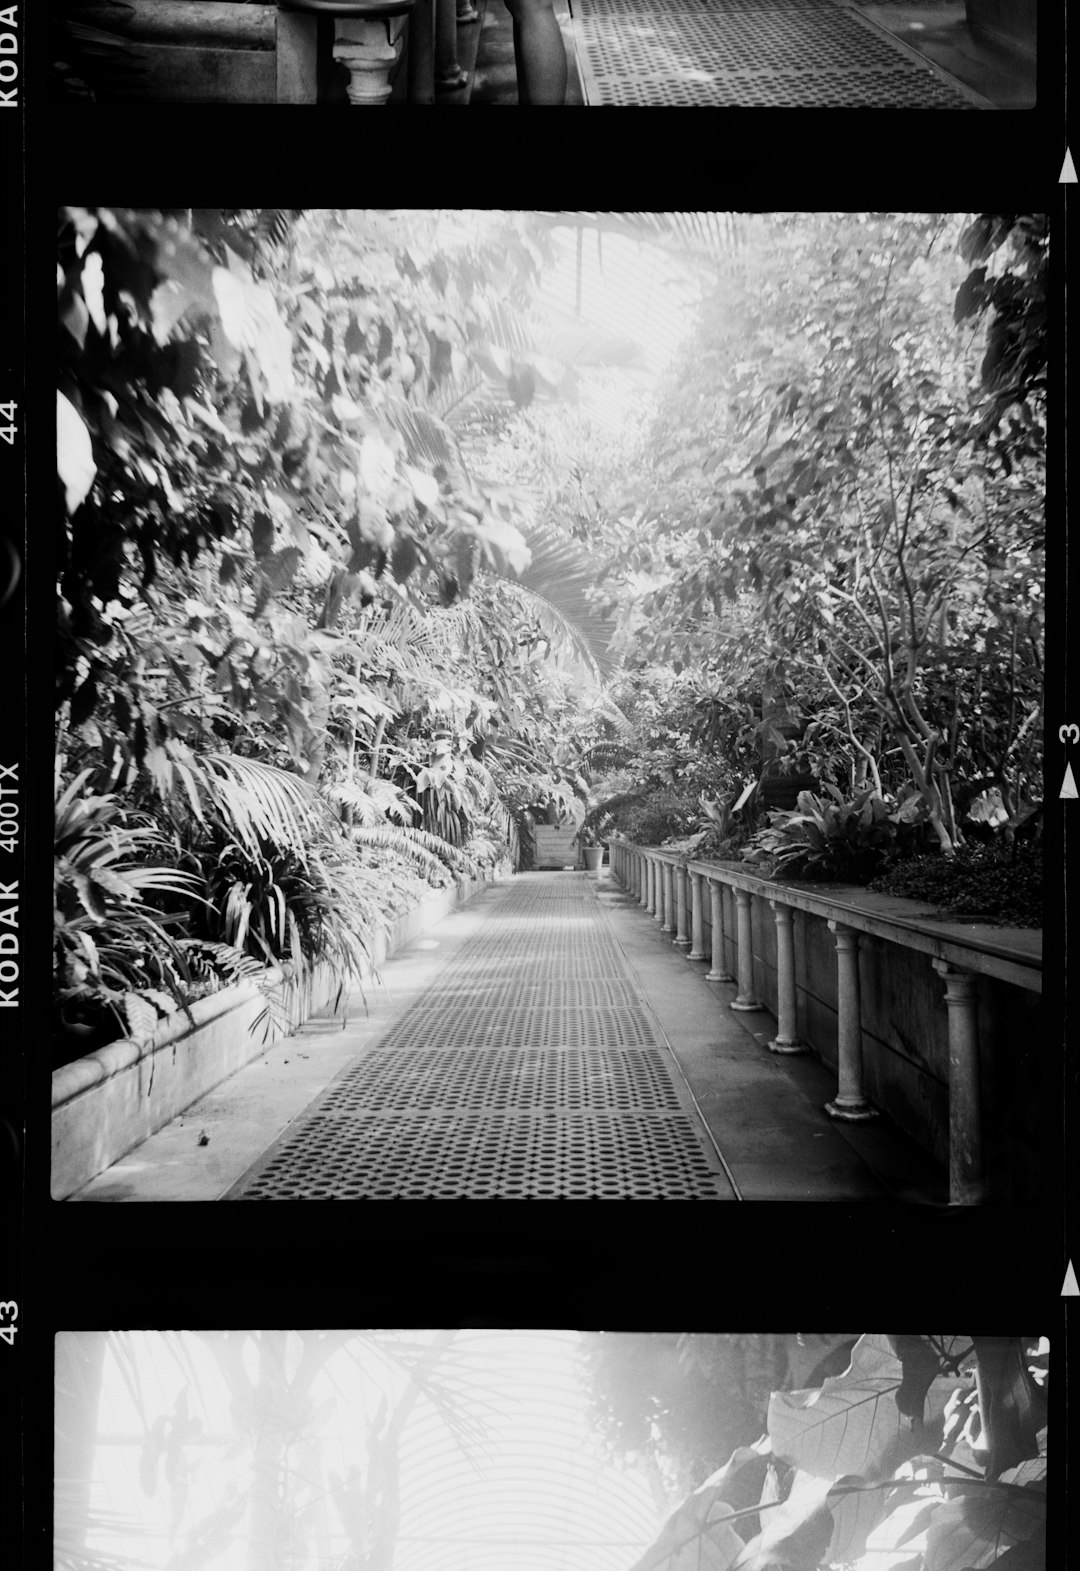 grayscale photo of pathway between trees